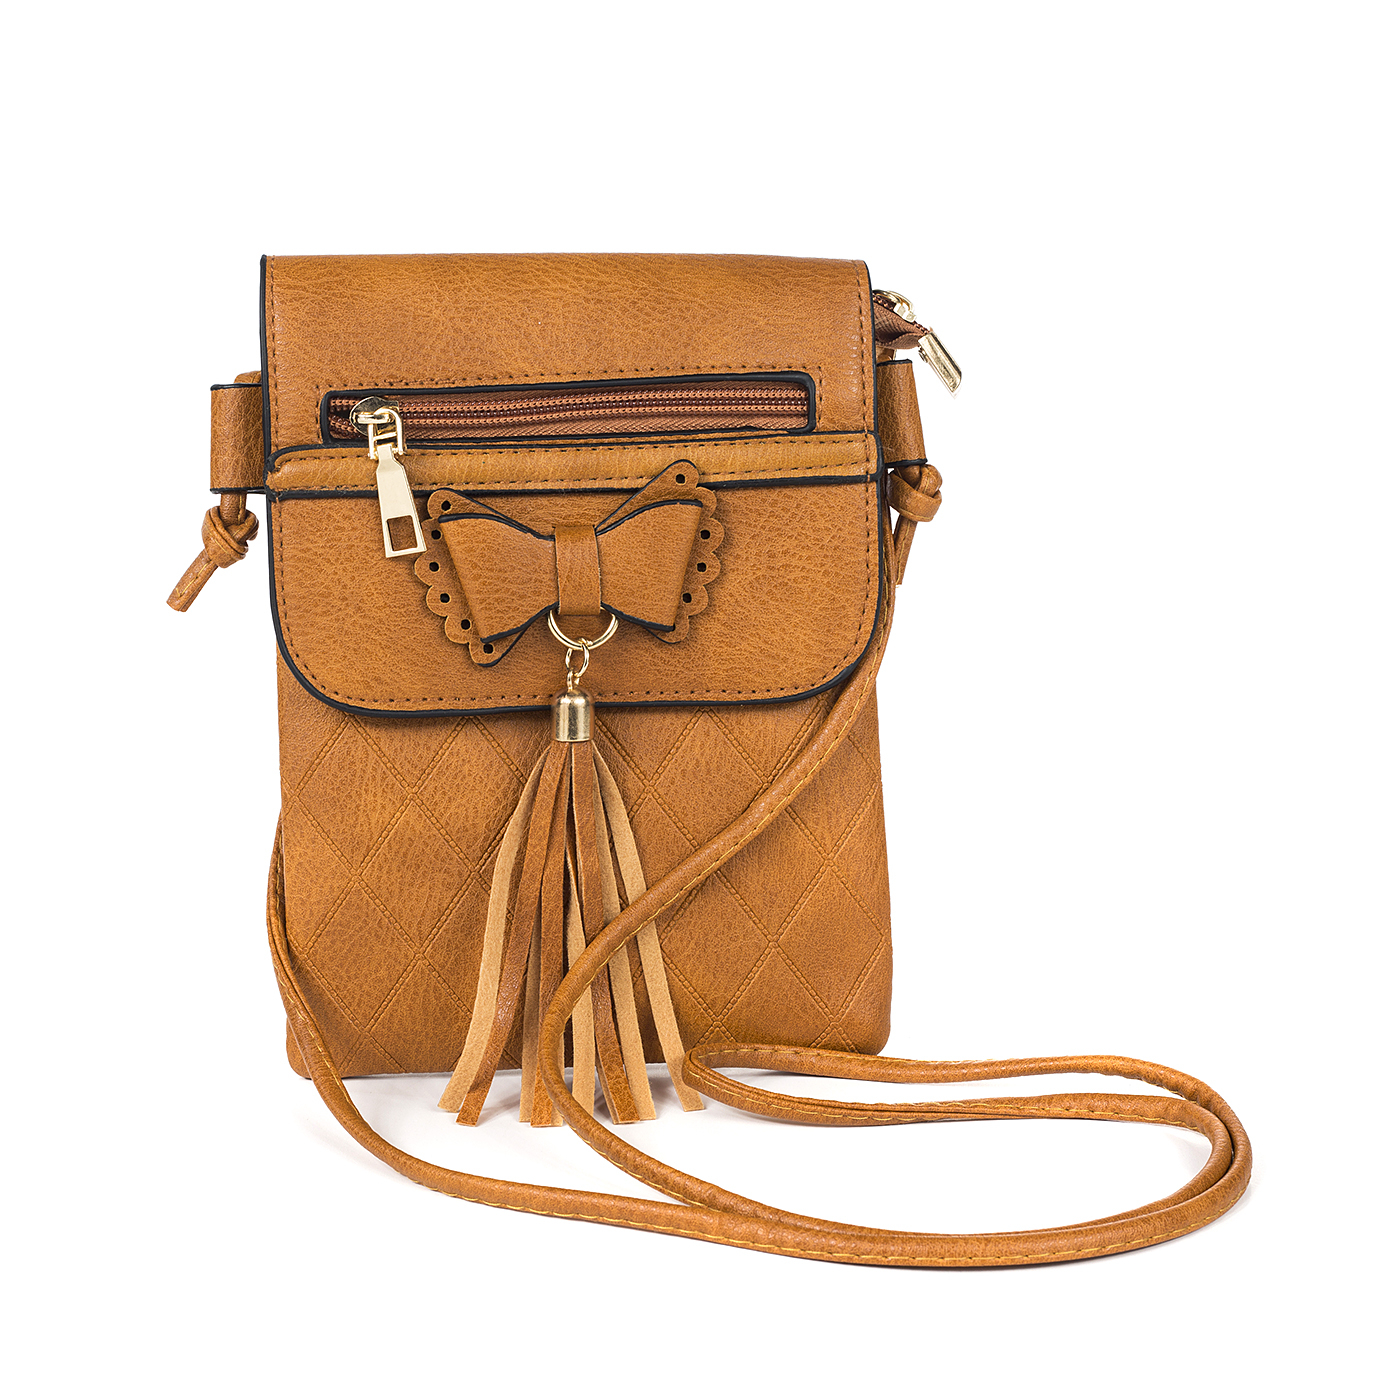 *NEW* Crossbody Bag - Butterfly Tassel: The perfect match to any outfit, our Butterfly Tassel Crossbody Bag is the must have accessory. Coming in a range of colours, you'll find one to match the mood
This  - Ciao Bella Dresses